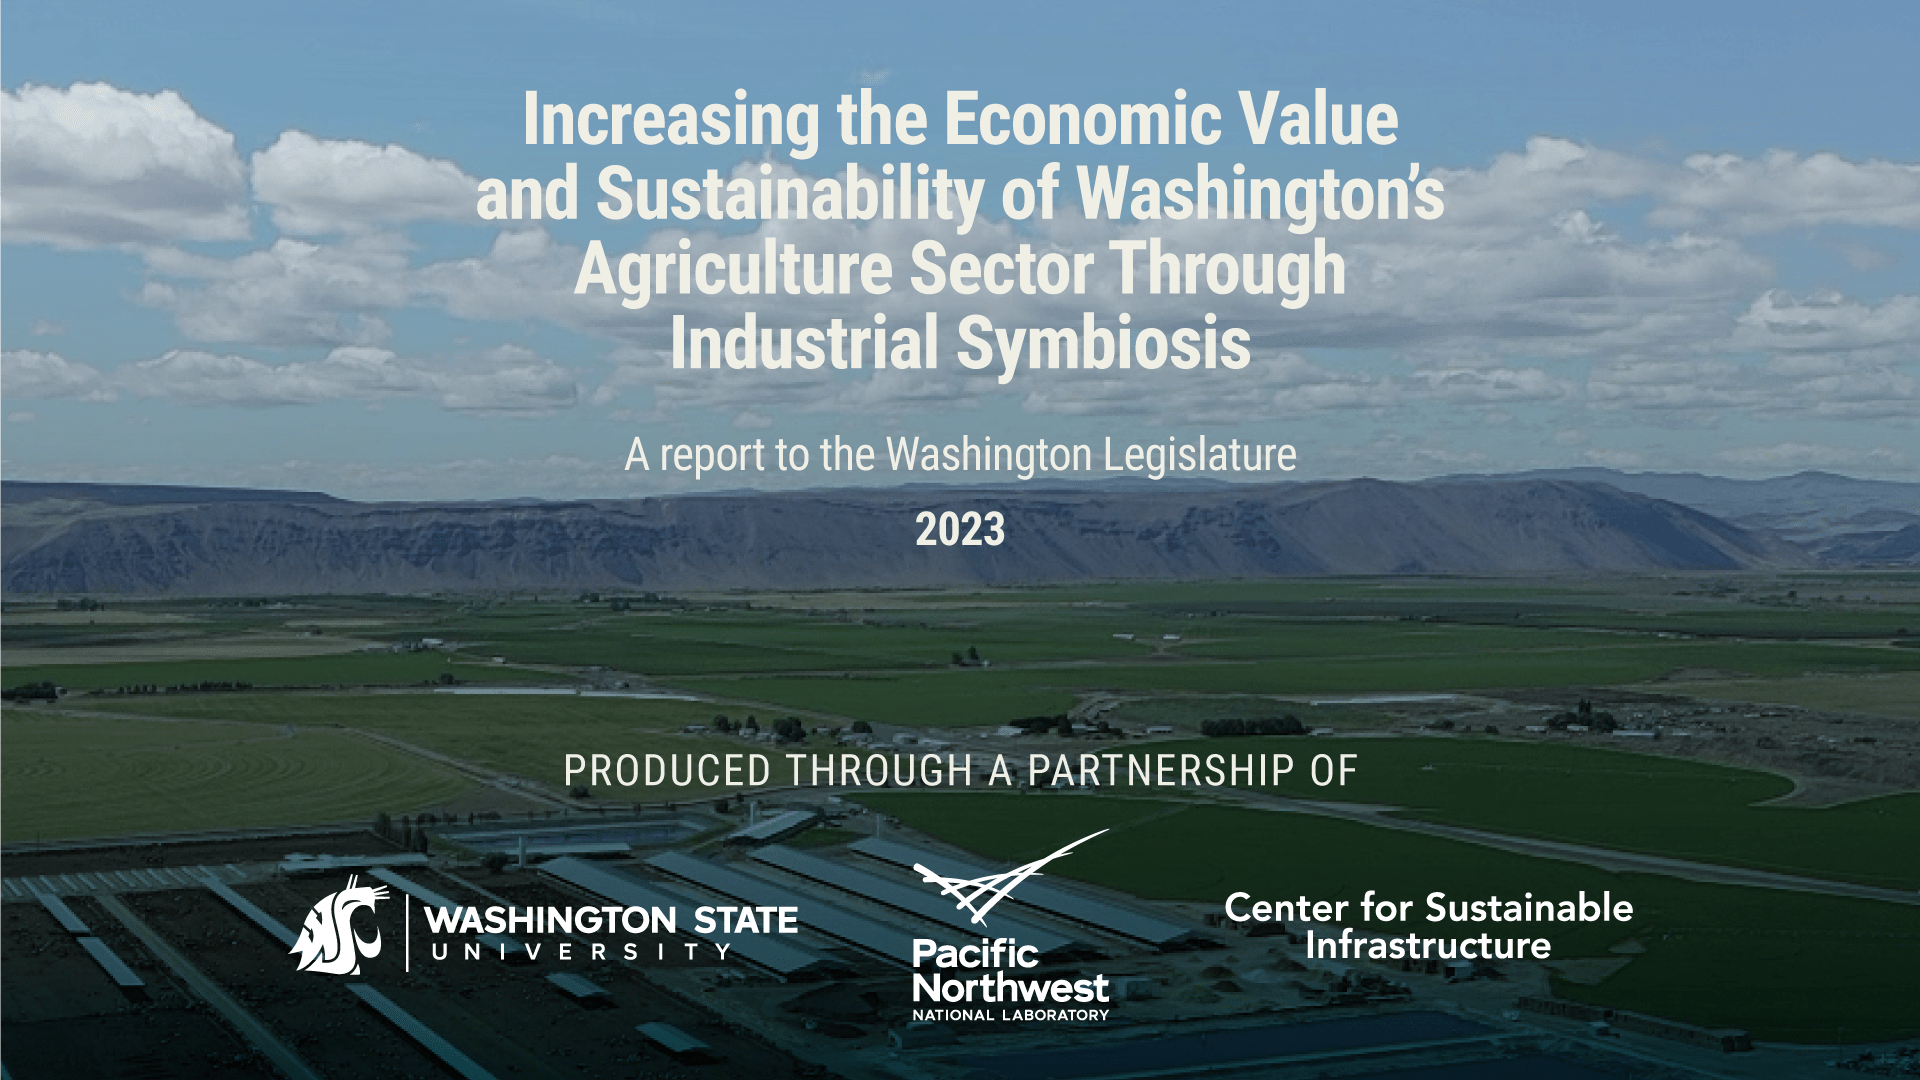 Increasing the Economic Value and Sustainability of Washington’s Agriculture Sector Through Industrial Symbiosis A report to the Washington Legislature 2023